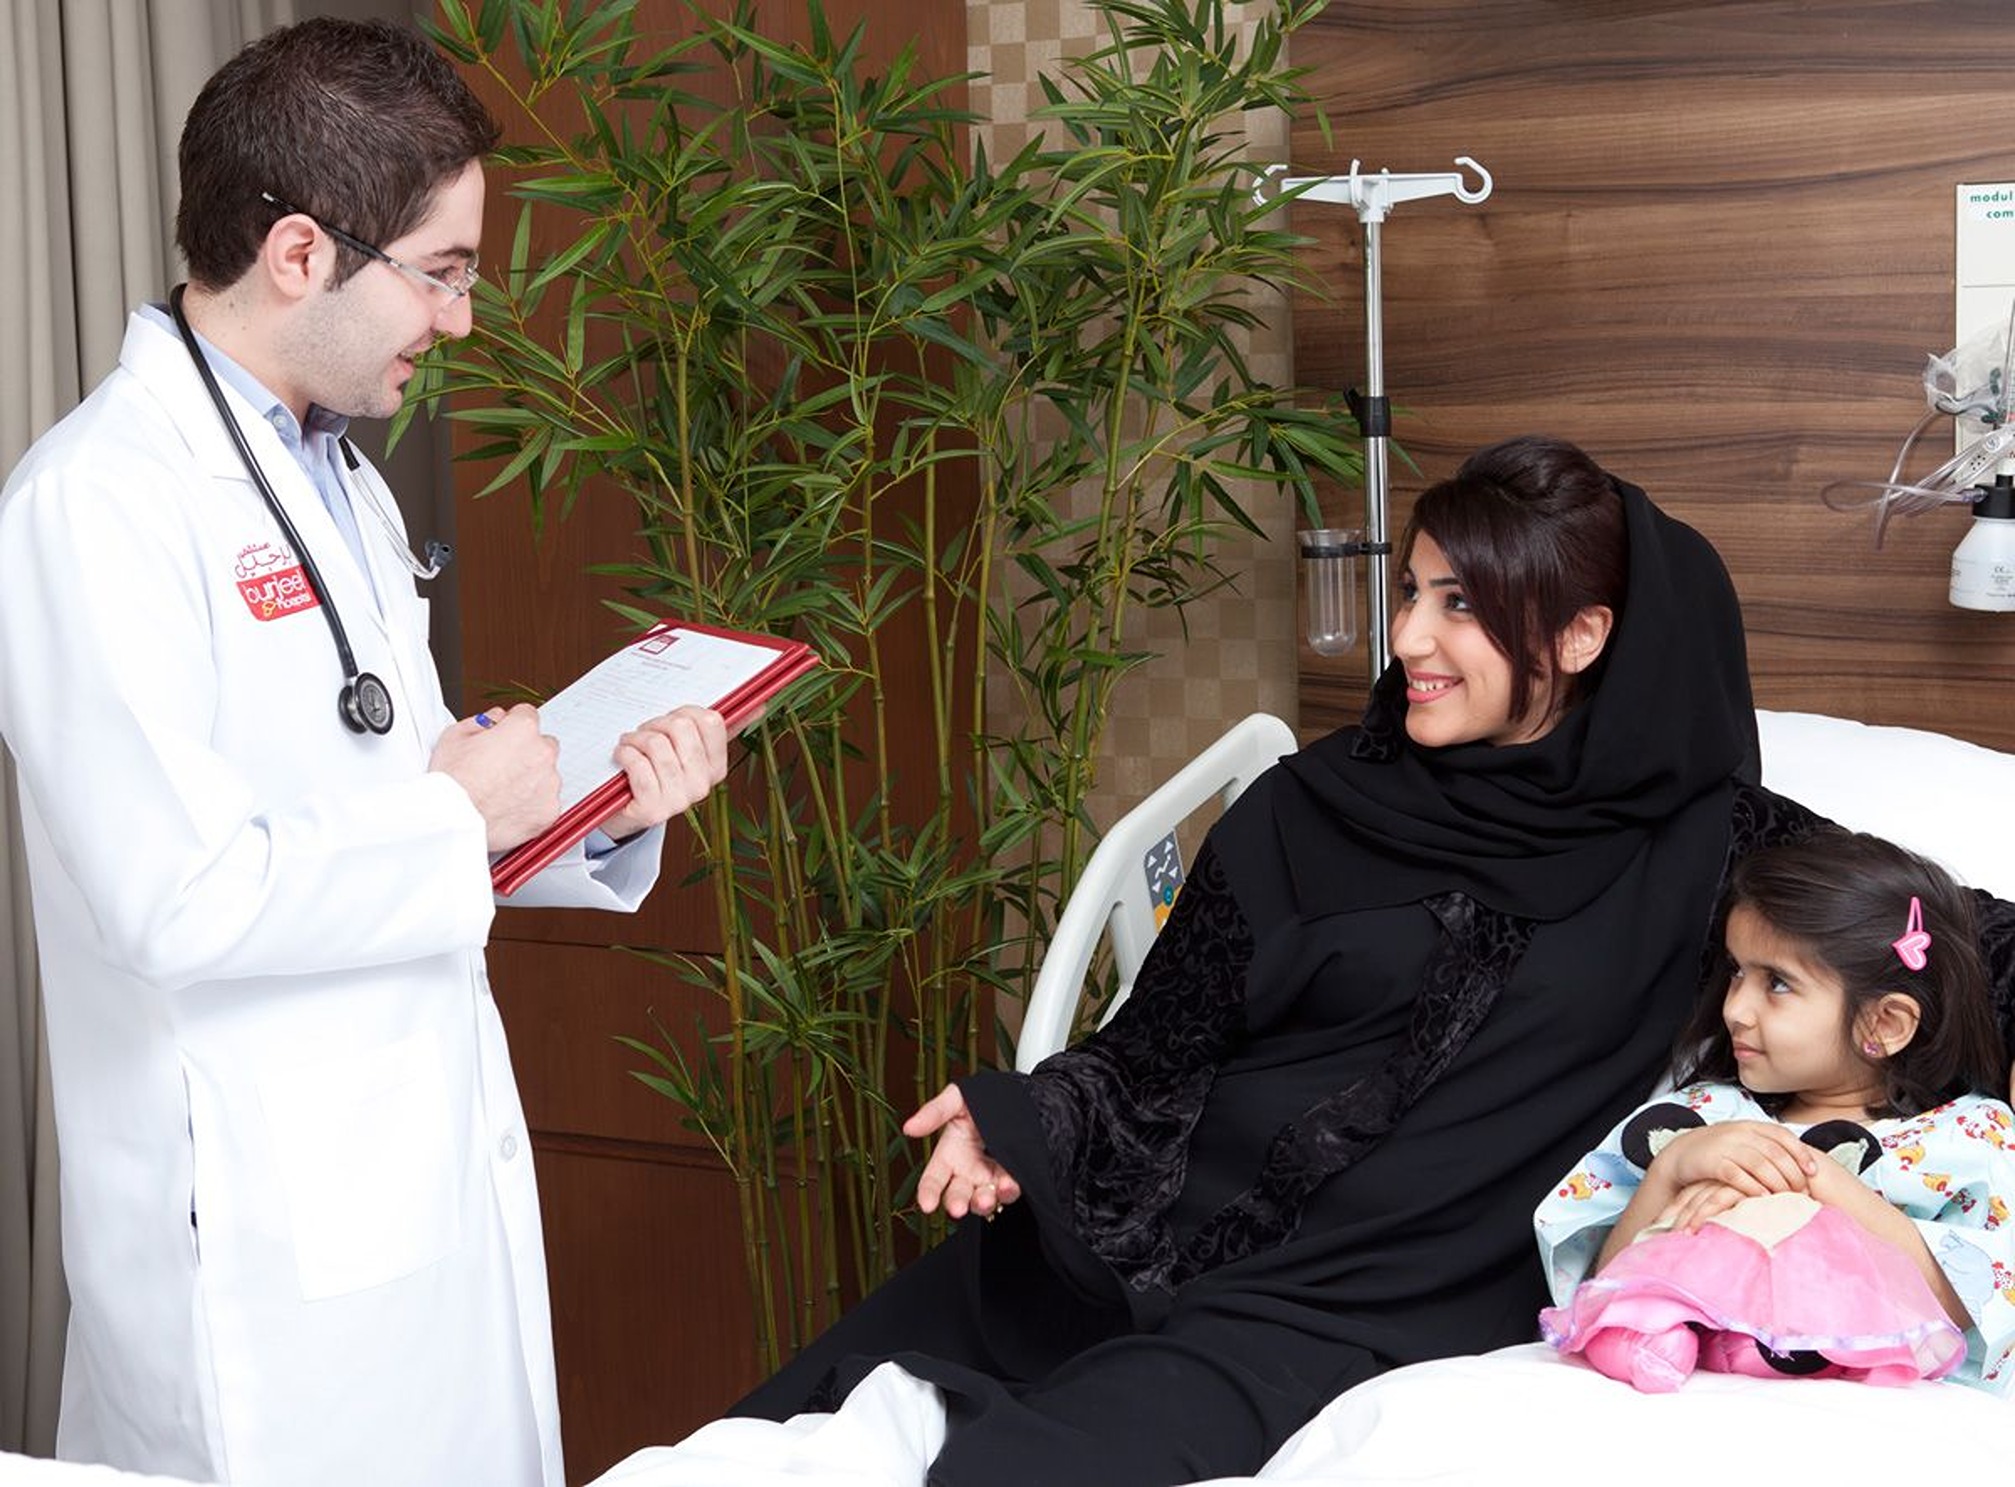 Burjeel Medical City: Empowering families through compassionate paediatric cancer care